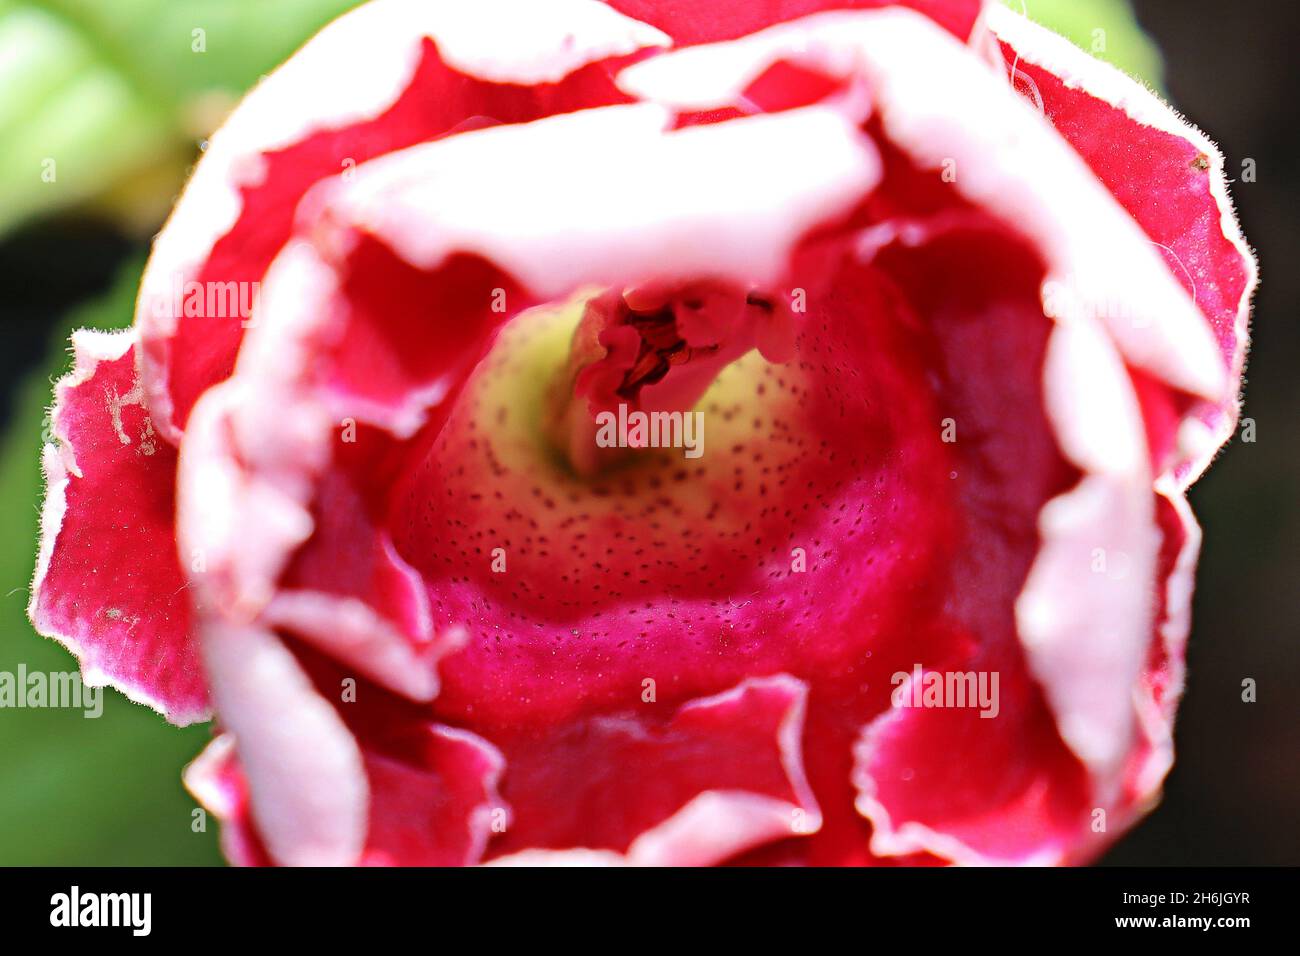 Close up of gloxinia (Sinningia speciosa), red flower, ornamental plant, showing its interior with pistil and stamens. Stock Photo